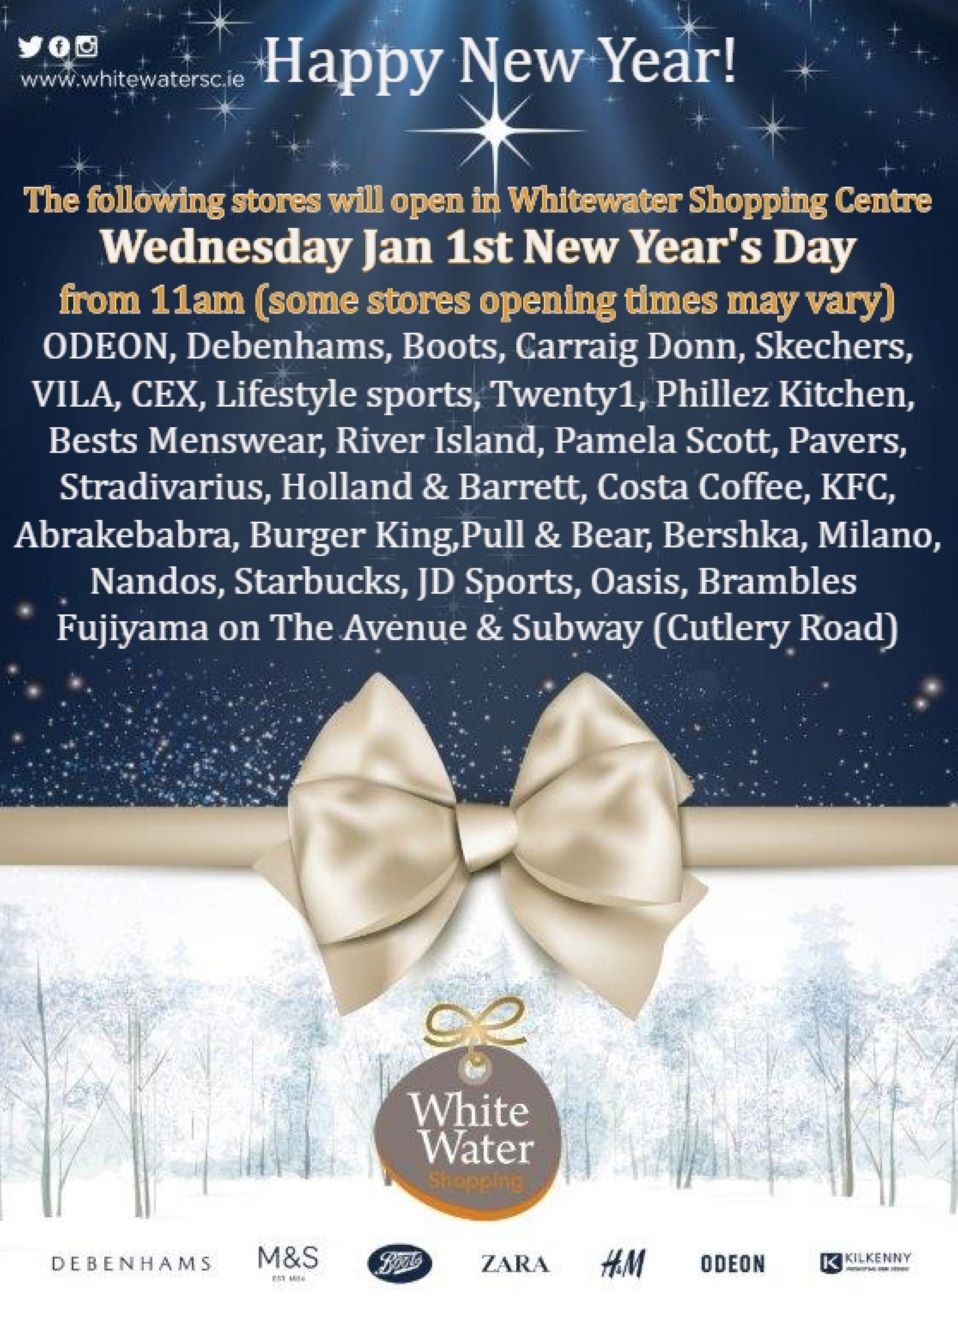 Whitewater Newbridge on Twitter: "Happy New Year ! Please see below for a list of the stores opening @Whitewater_SC on Jan 1st New Years ! https://t.co/HaF1CJpoiu" / Twitter